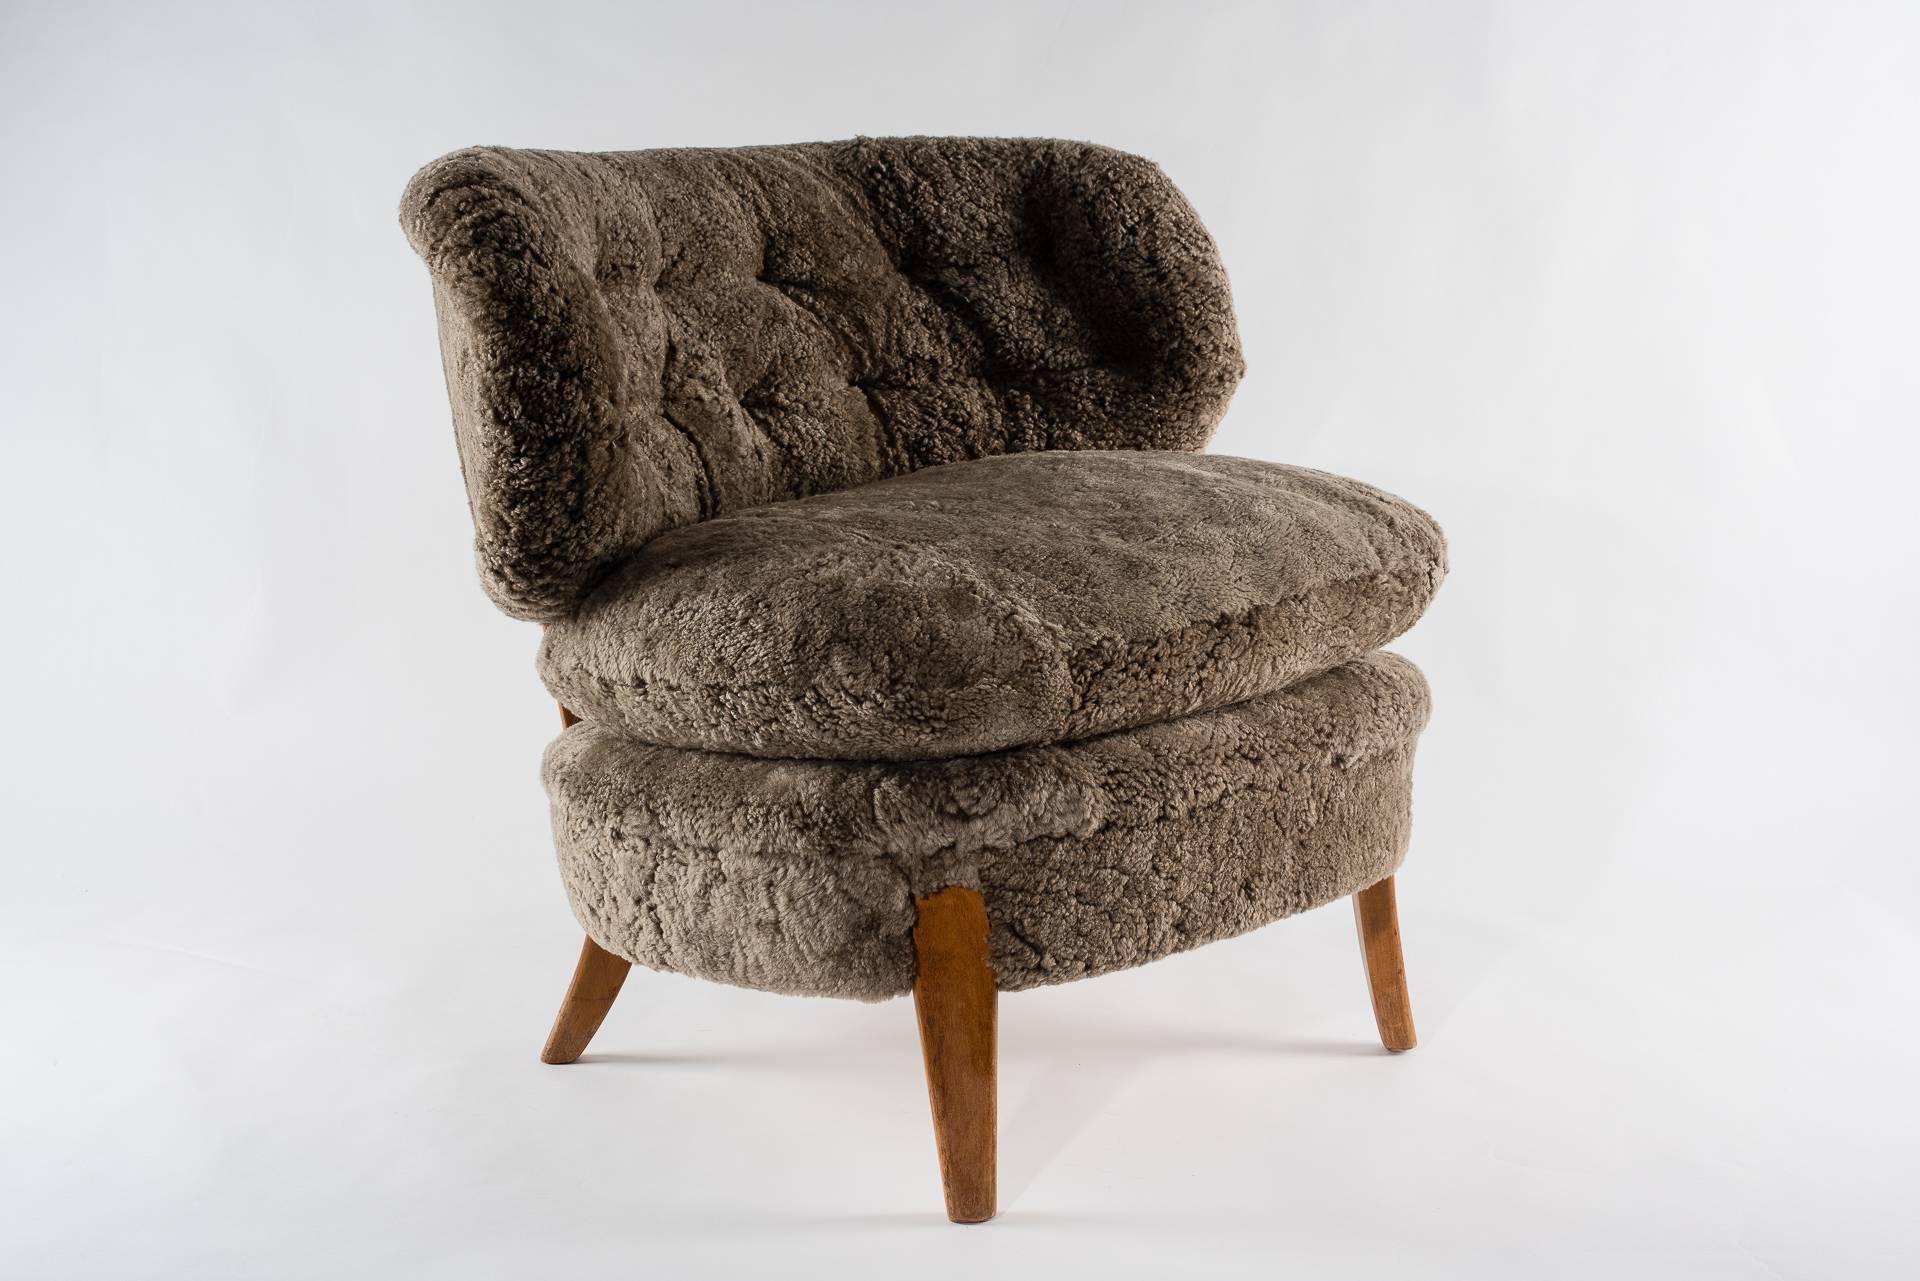 Armchair designed by Otto Schulz for Boet, Gothenburg, Sweden.
Curly lambskin upholstery, color taupe, light brown.
circa 1940.